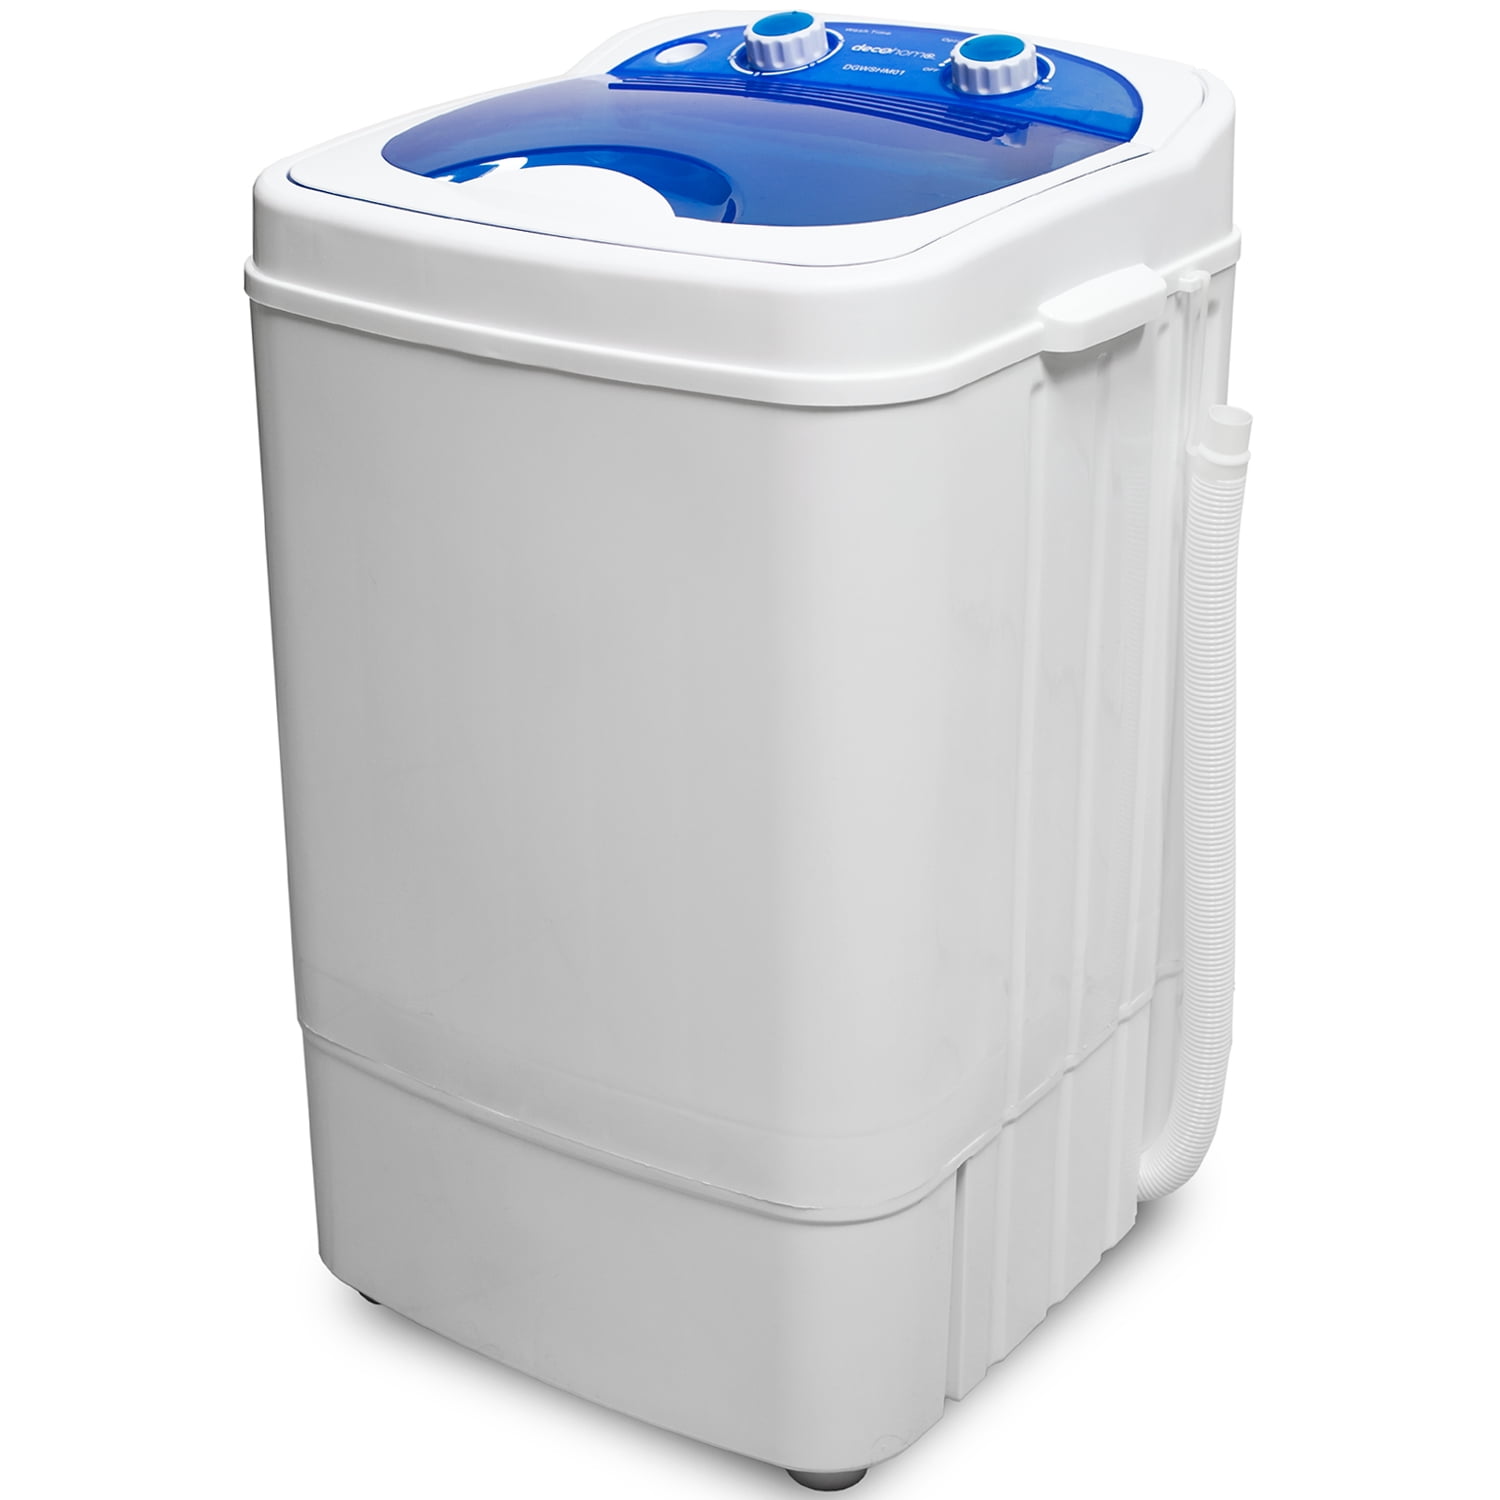 Portable Compact Laundry Washer with Drain Pump 10 Wash Programs 8 Water Levels with LED Display Grey Krib Bling Full-Automatic Washing Machine 13lbs 